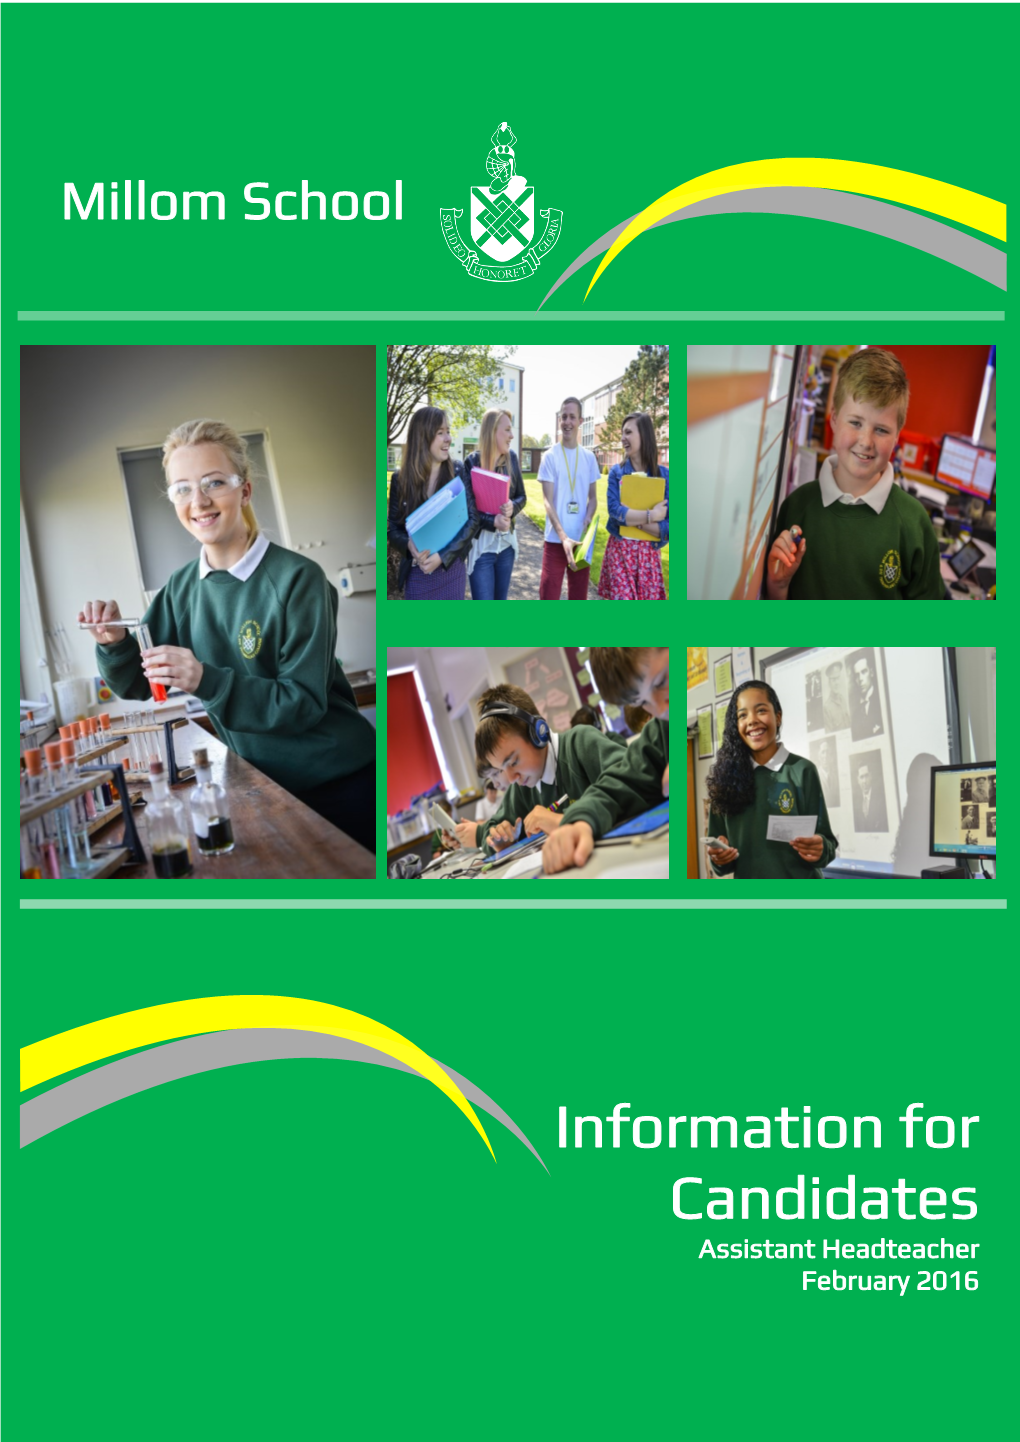 Information for Candidates Assistant Headteacher February 2016